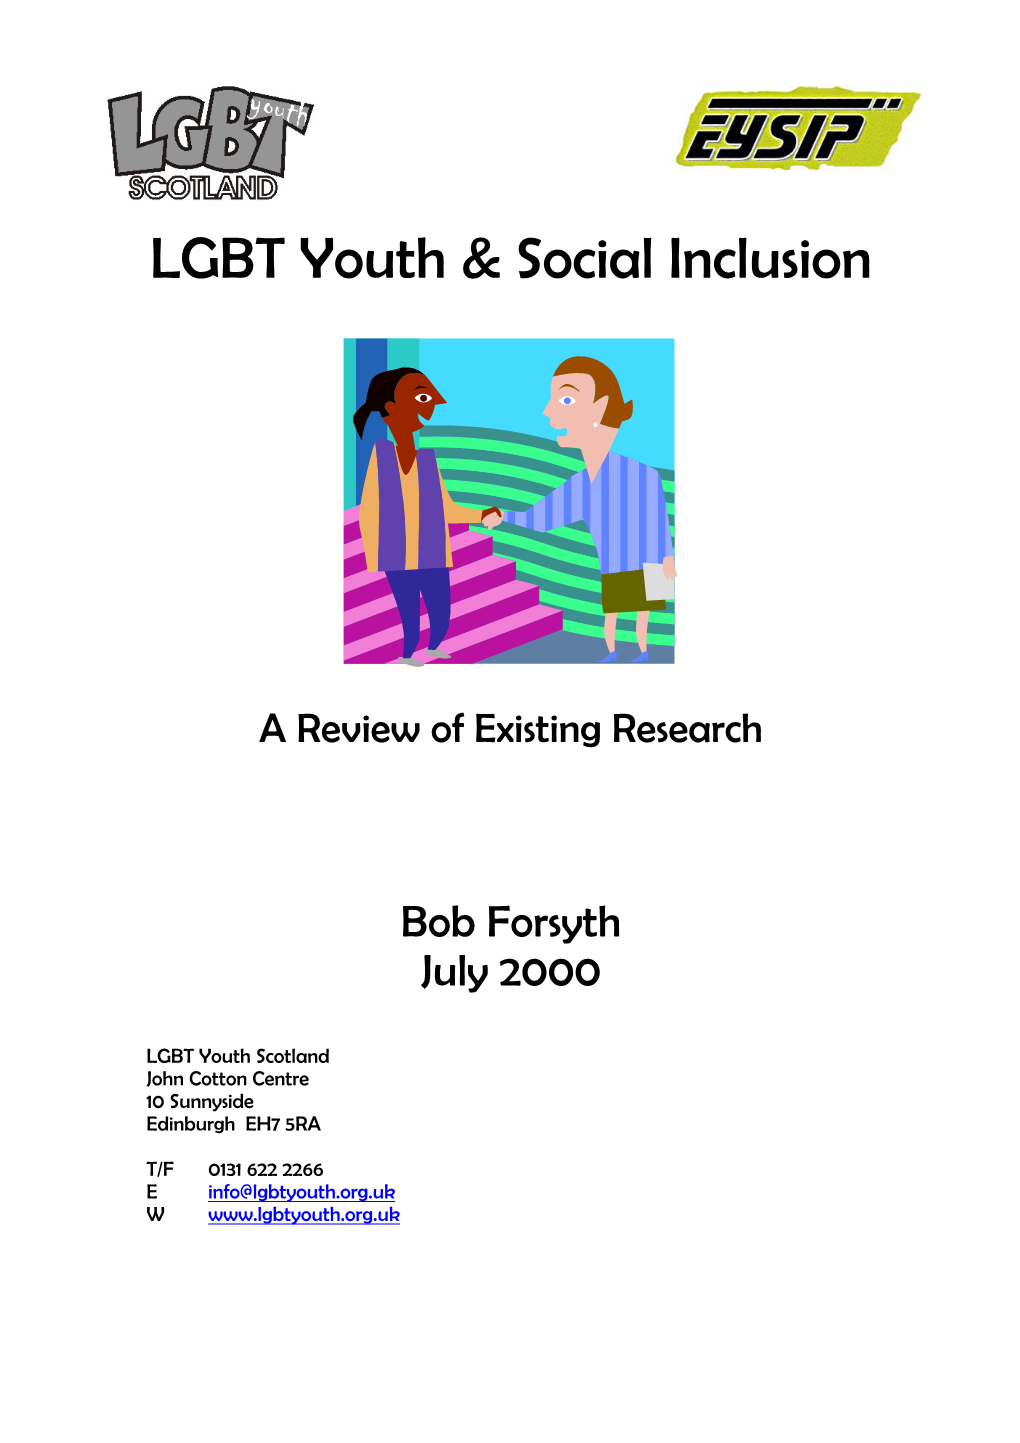 LGBT Youth & Social Inclusion